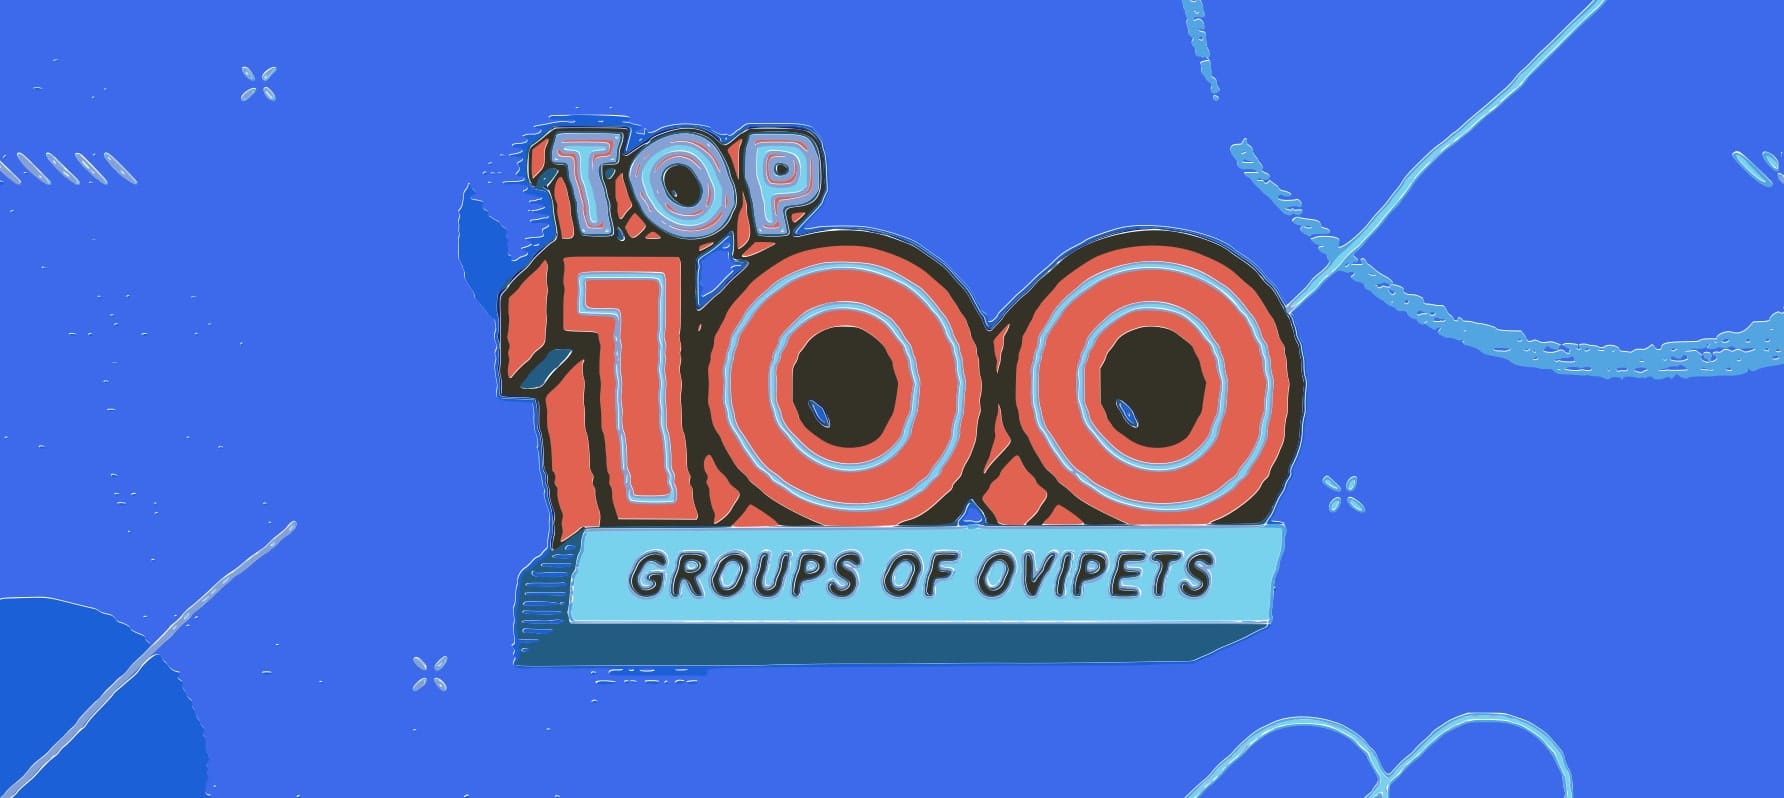 Top 100 joined groups of OviPets image